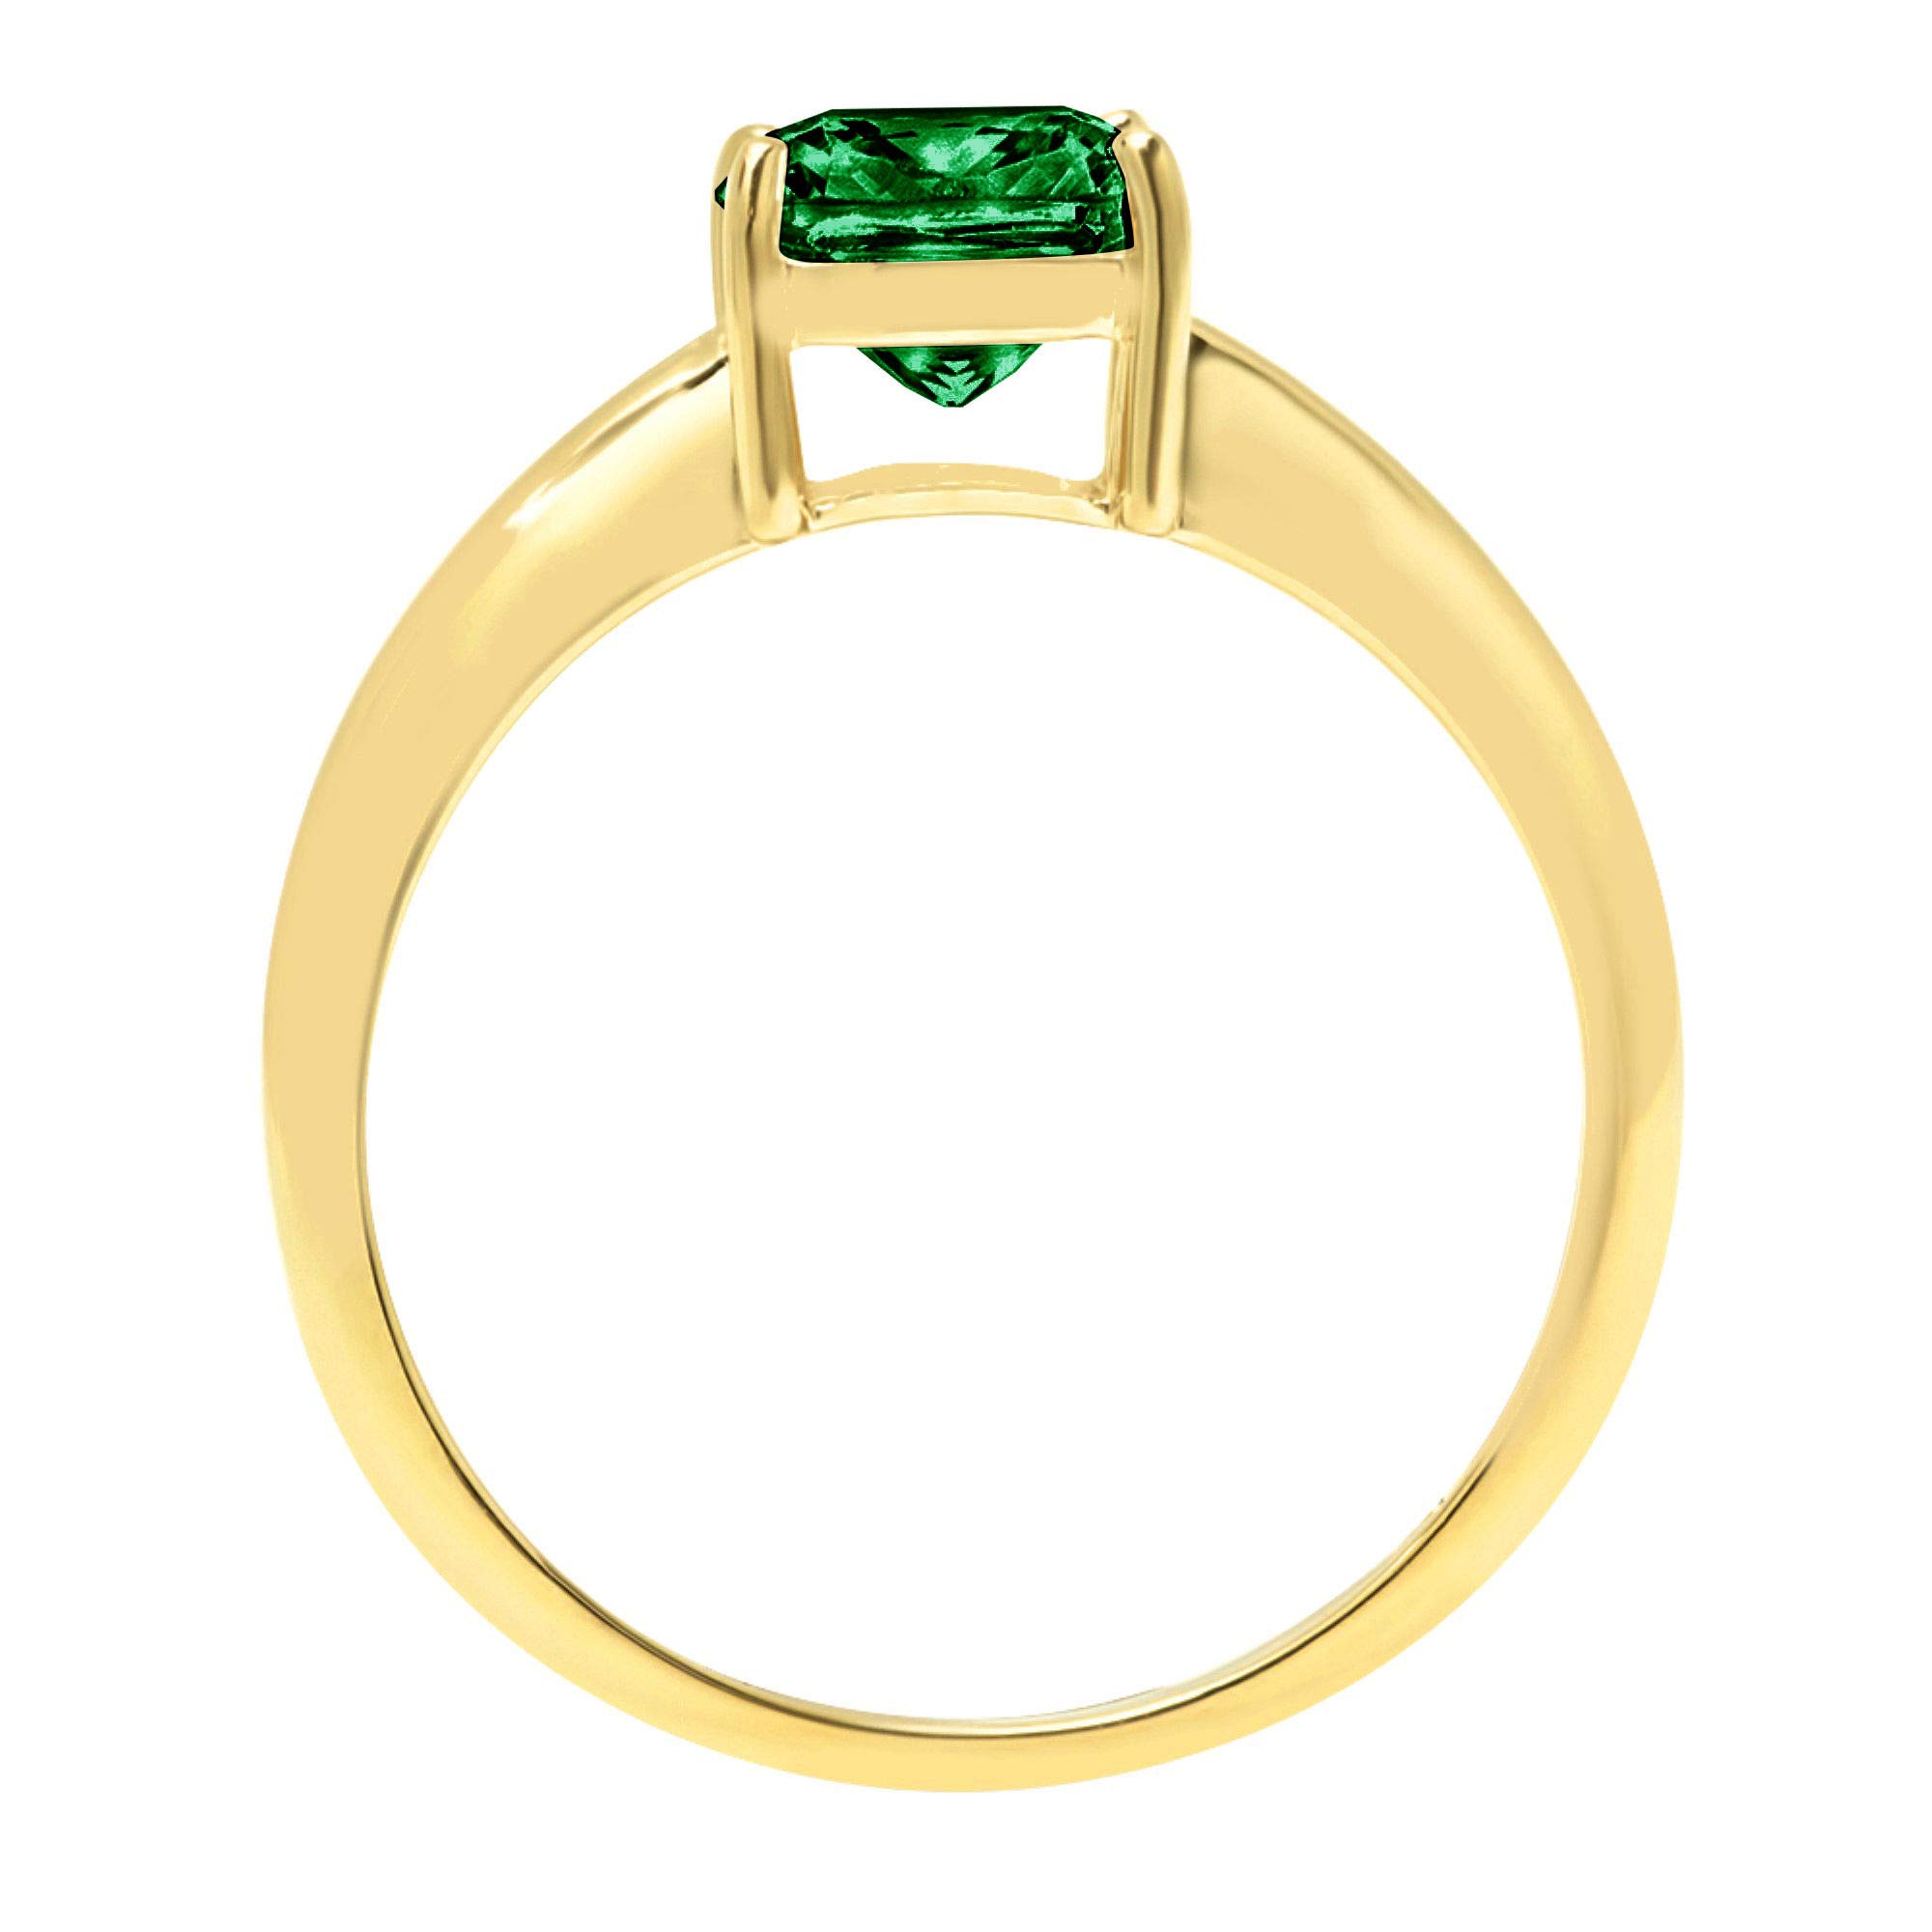 Clara Pucci 1.4ct Cushion Cut Solitaire Simulated Green Emerald Engagement Bridal Promise Anniversary Ring 14k Yellow Gold